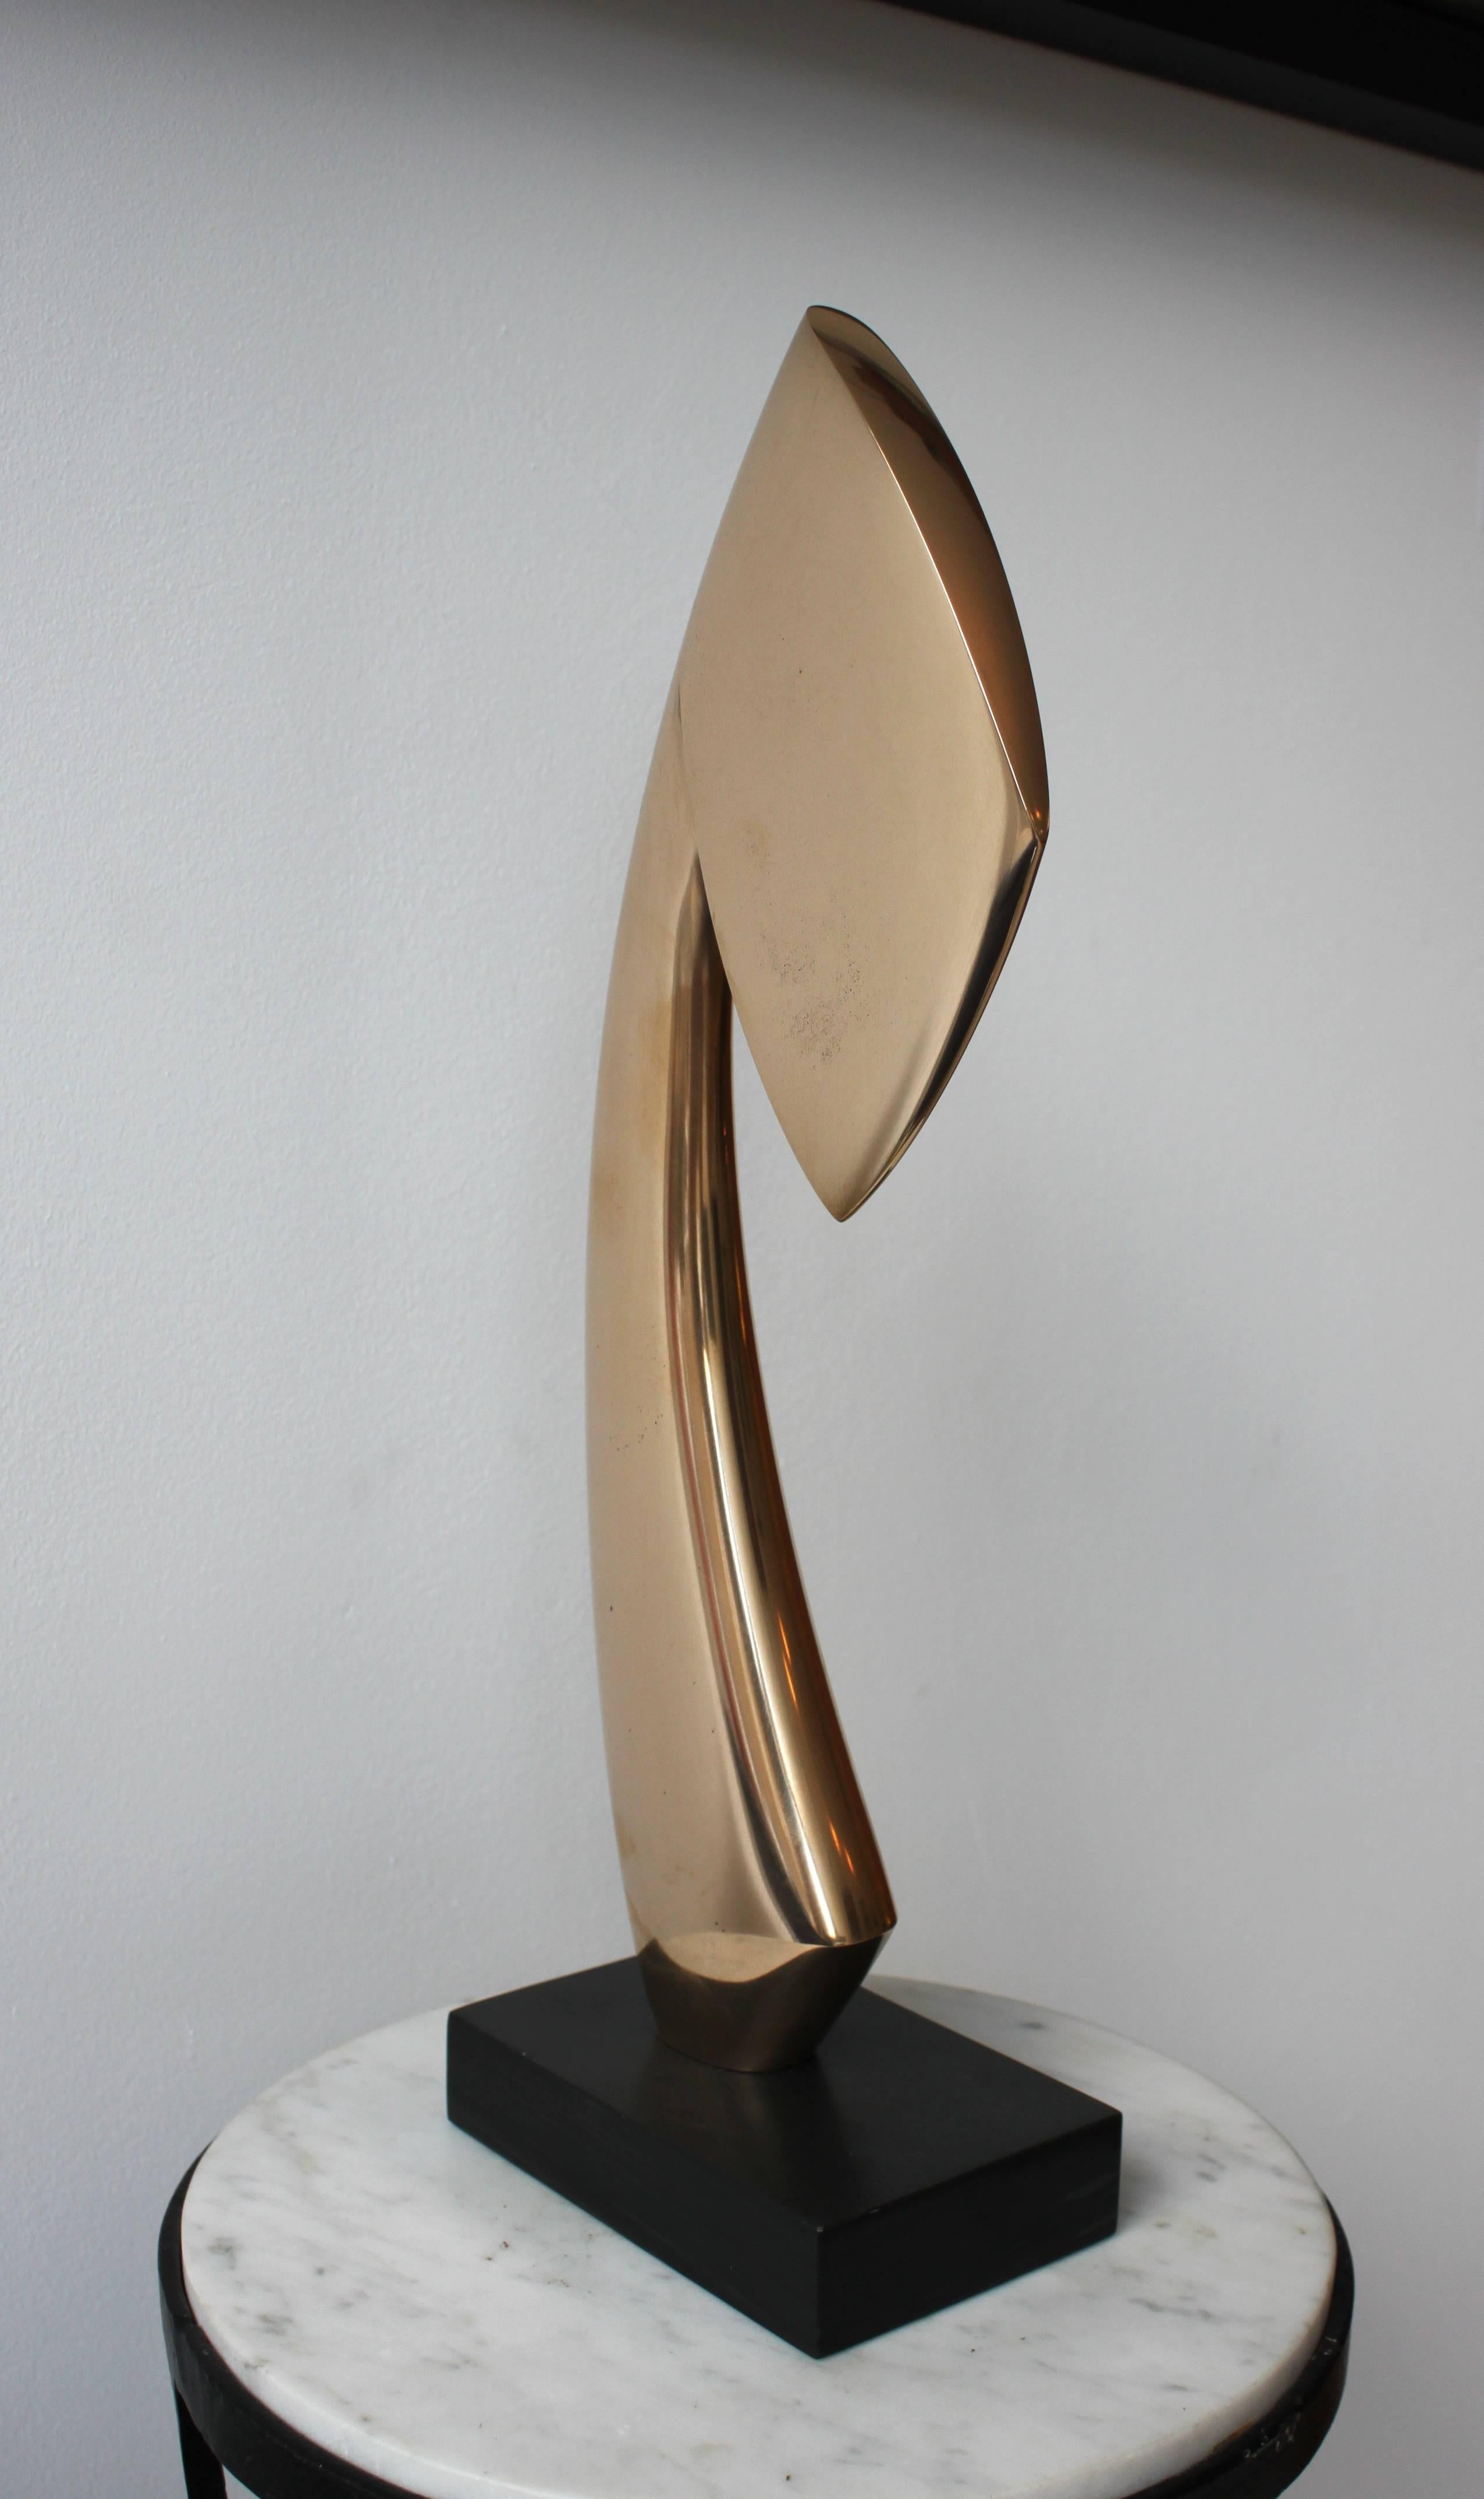 Artist: Denis Mitchell (1912-1993).
Title: Carah.
Medium: Polished bronze on marble base.
Edition: 3/7.
Date: 1976/77.

Signed with initials and numbered ‘DAM/76/3’ (at the base of the bronze); further signed with initials, titled and dated